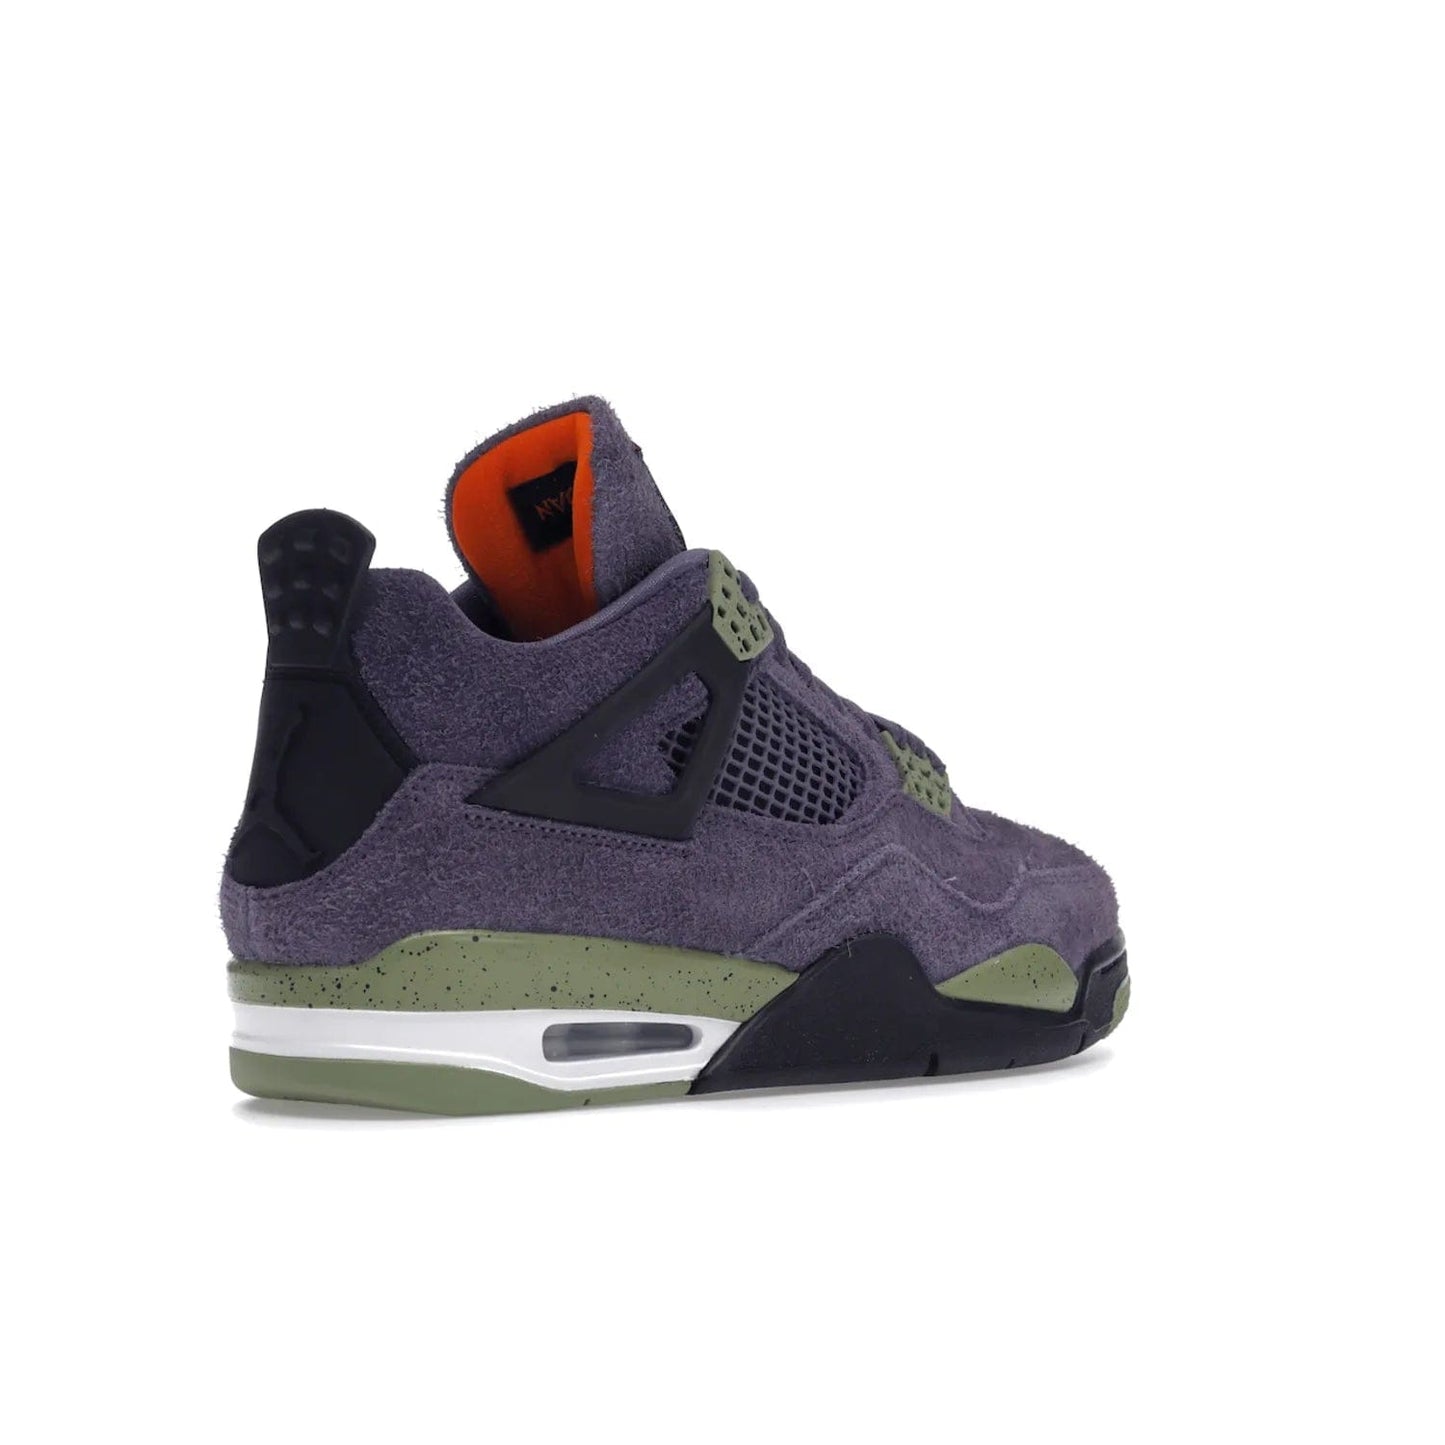 Jordan 4 Retro Canyon Purple (Women's) - Image 33 - Only at www.BallersClubKickz.com - New Air Jordan 4 Retro Canyon Purple W sneaker features shaggy purple suede, lime highlights & safety orange Jumpman branding. Classic ankle-hugging silhouette with modern colors released 15/10/2022.